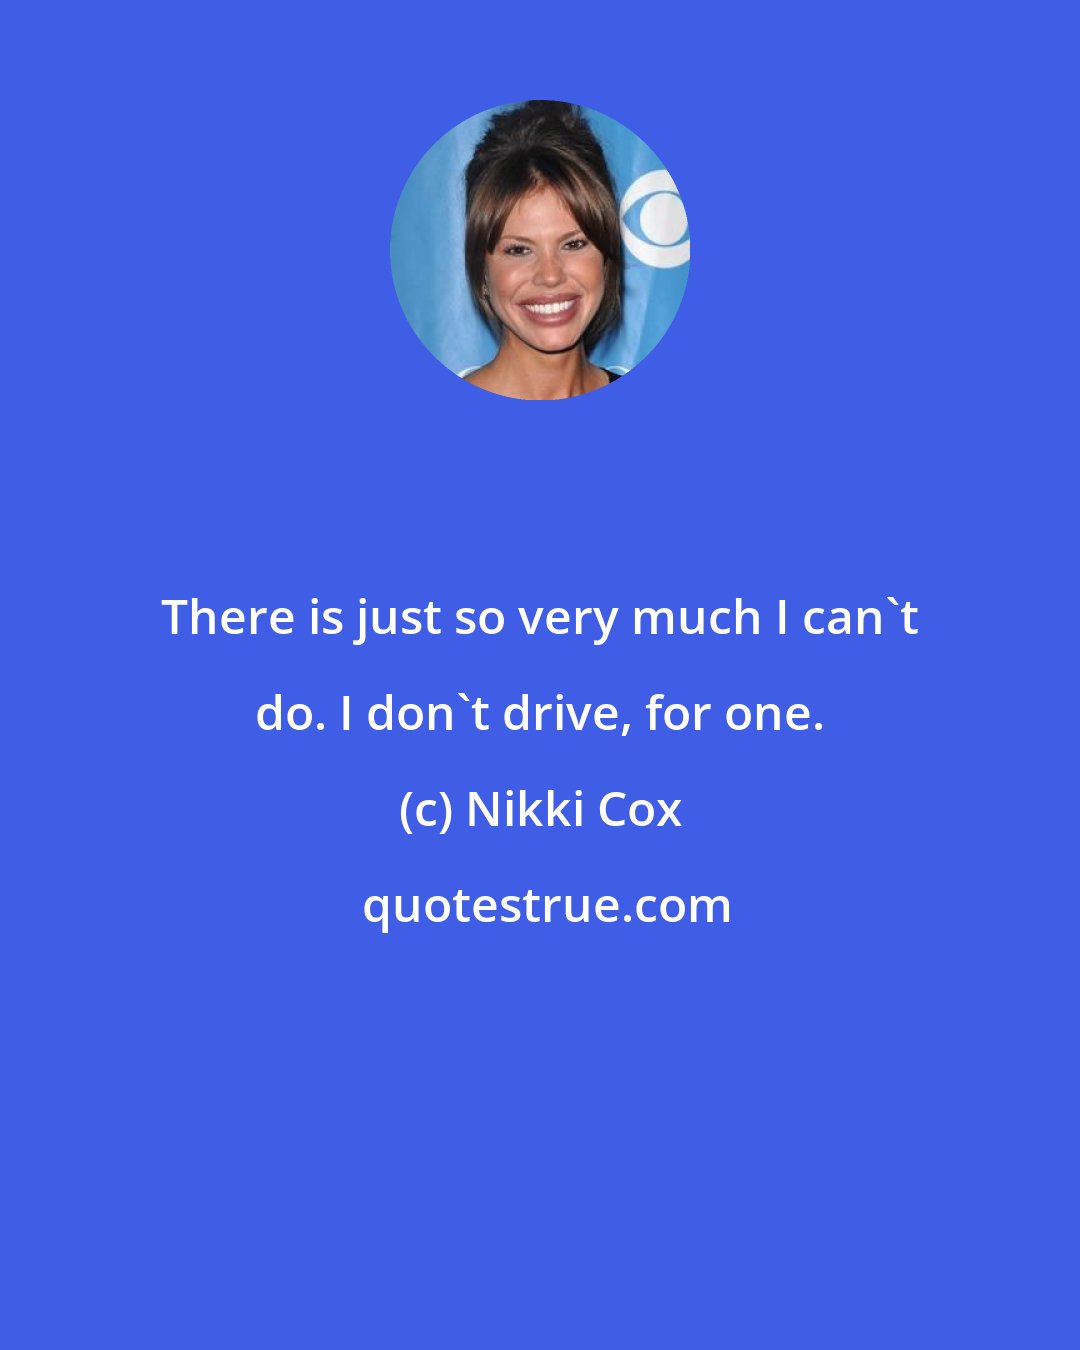 Nikki Cox: There is just so very much I can't do. I don't drive, for one.